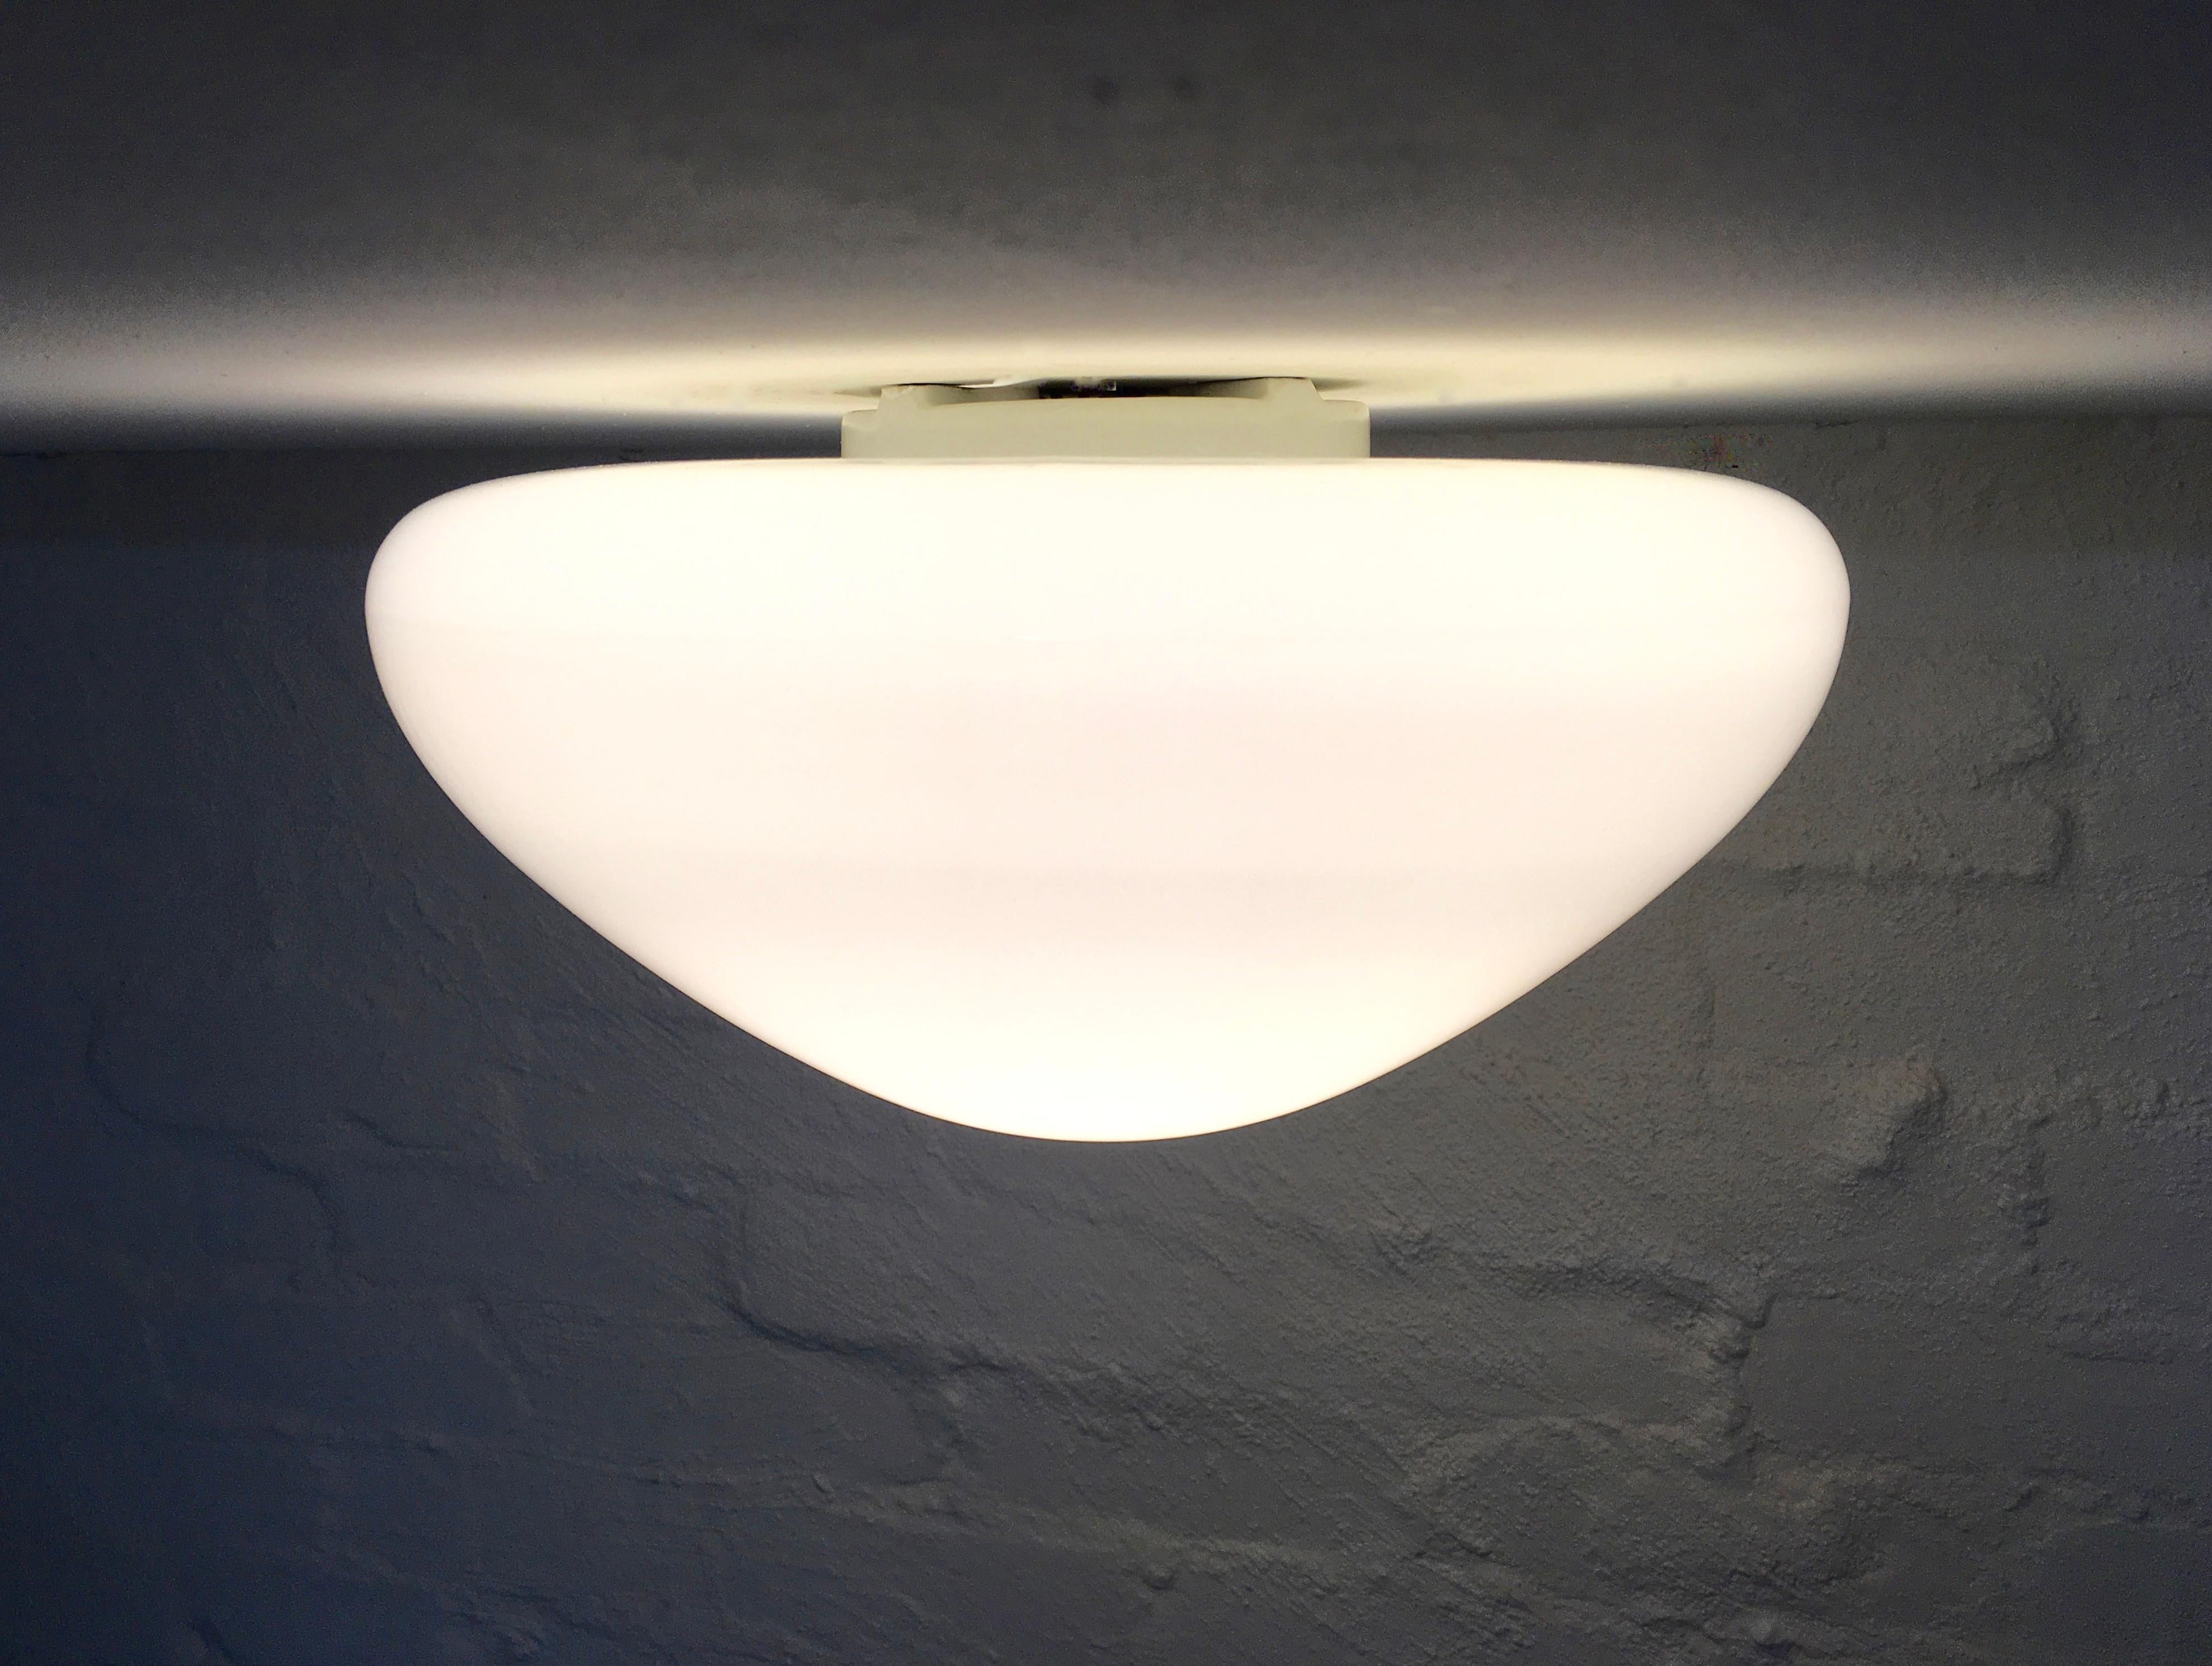 This simple, elegant ceiling light or wall sconce by Wilhelm Wagenfeld shows the strong influence of his Bauhaus education. As with all of his designs, high quality, high functionality and simple, beautiful, pared-back design are the